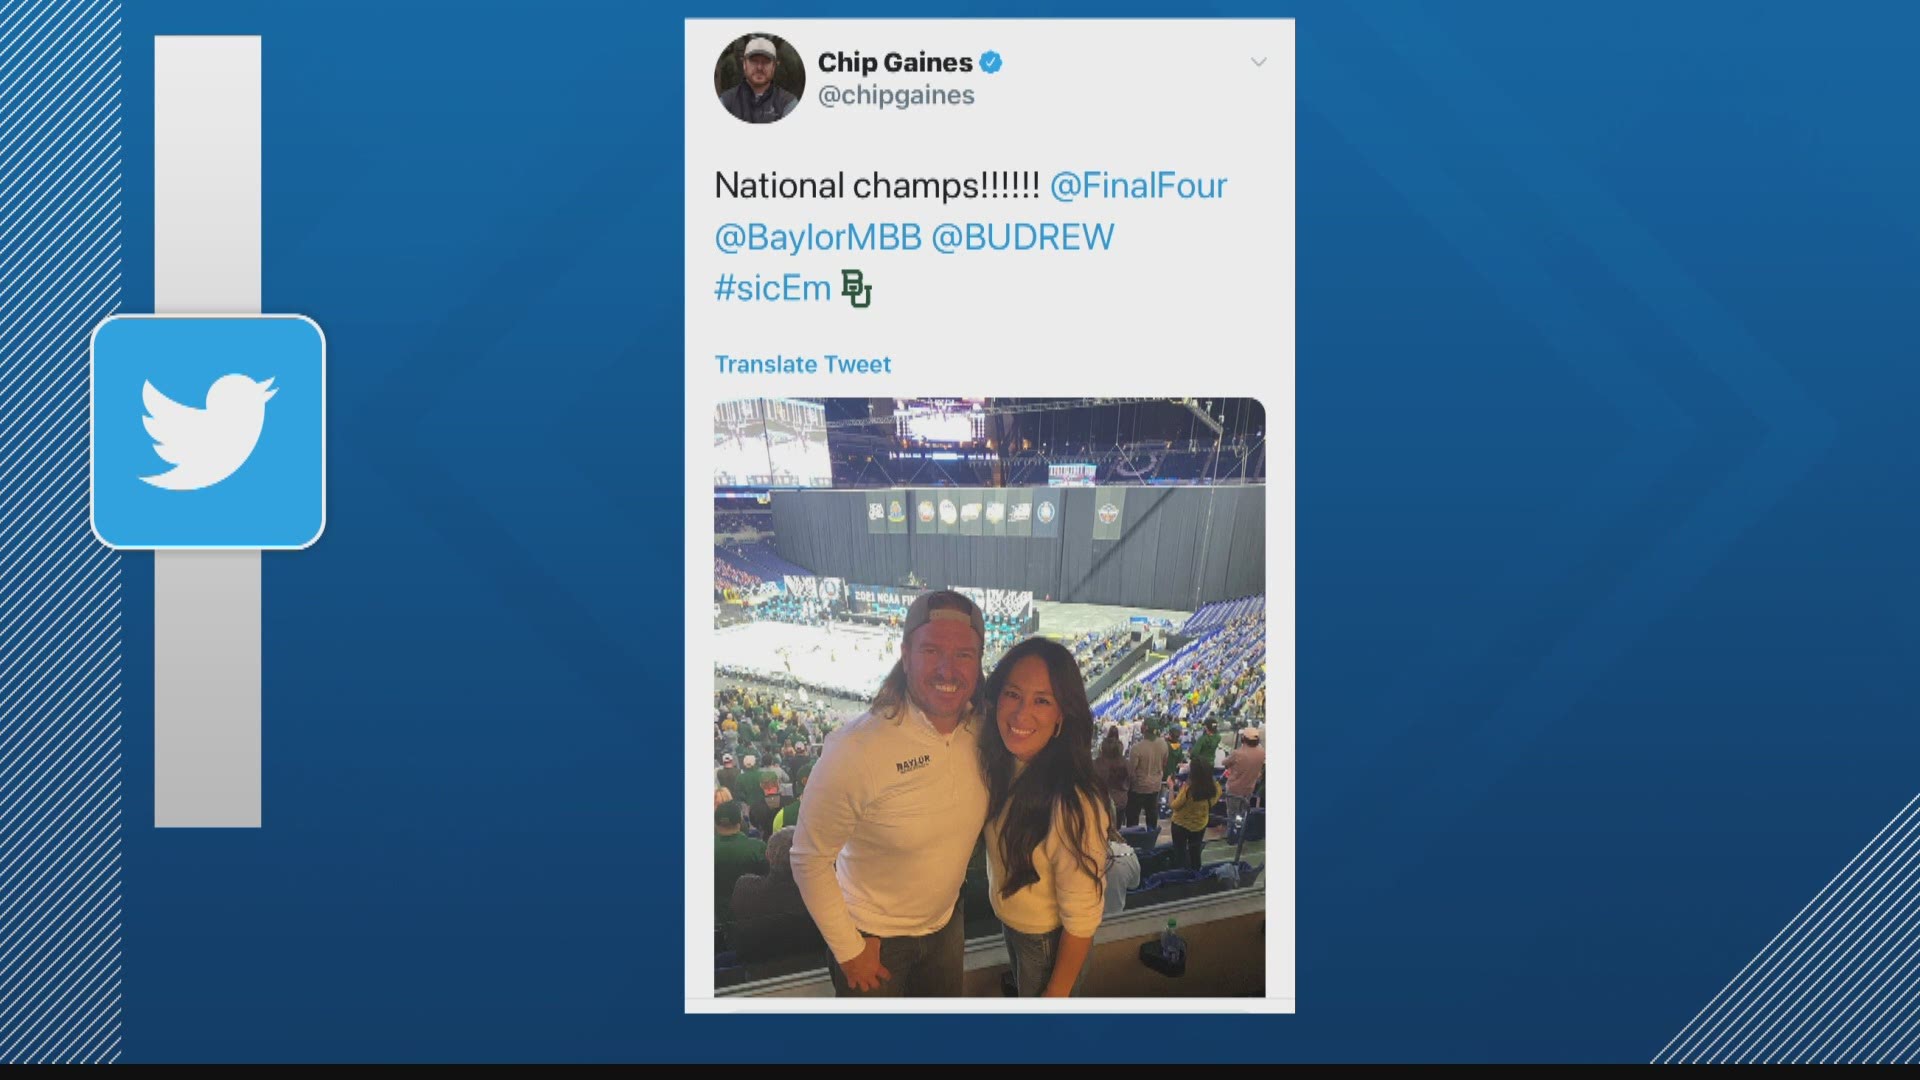 Chip and Joanna Gaines and Robert III were among the familiar faces at Lucas Oil Stadium for the NCAA Men's Basketball Championship game.